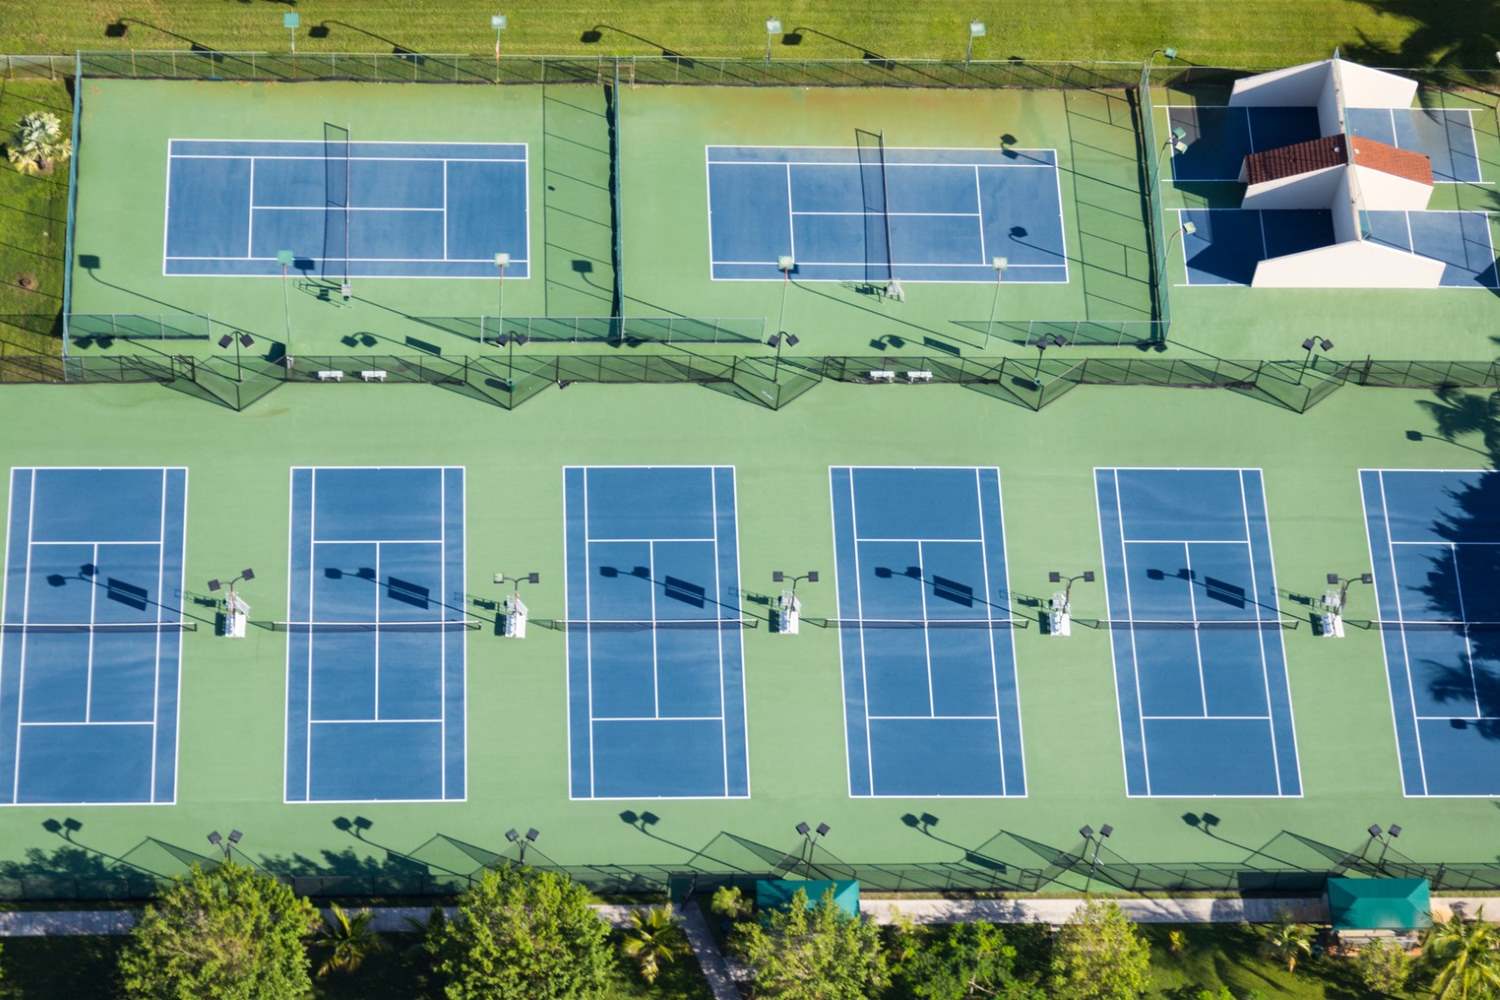 SPORTS TENNIS COURTS